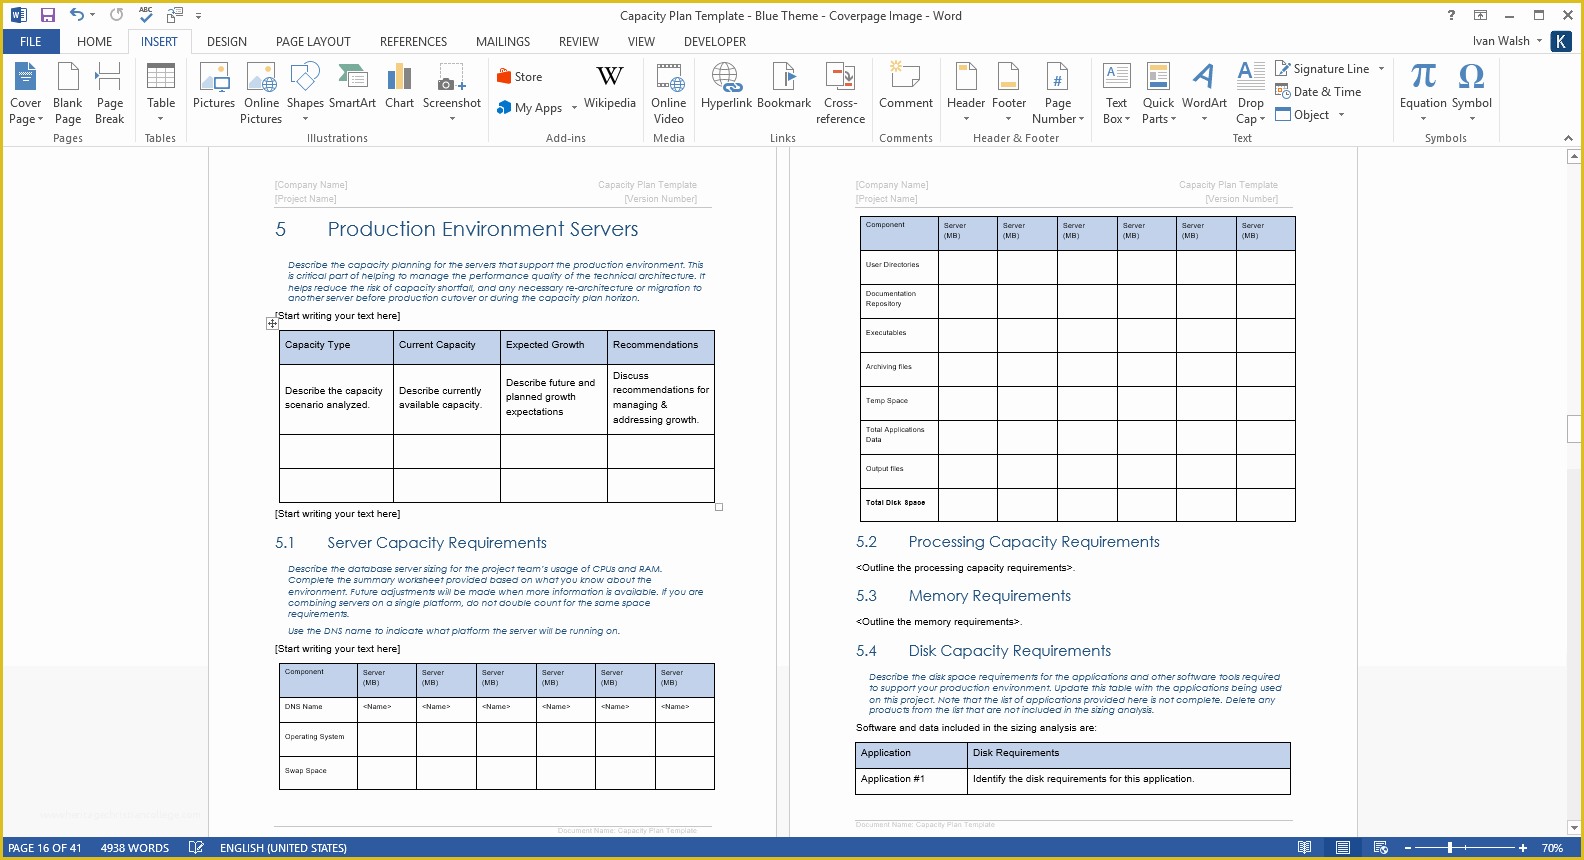 Capacity Planning Excel Template Free Of Capacity Plan Template – Download Microsoft Word and Excel